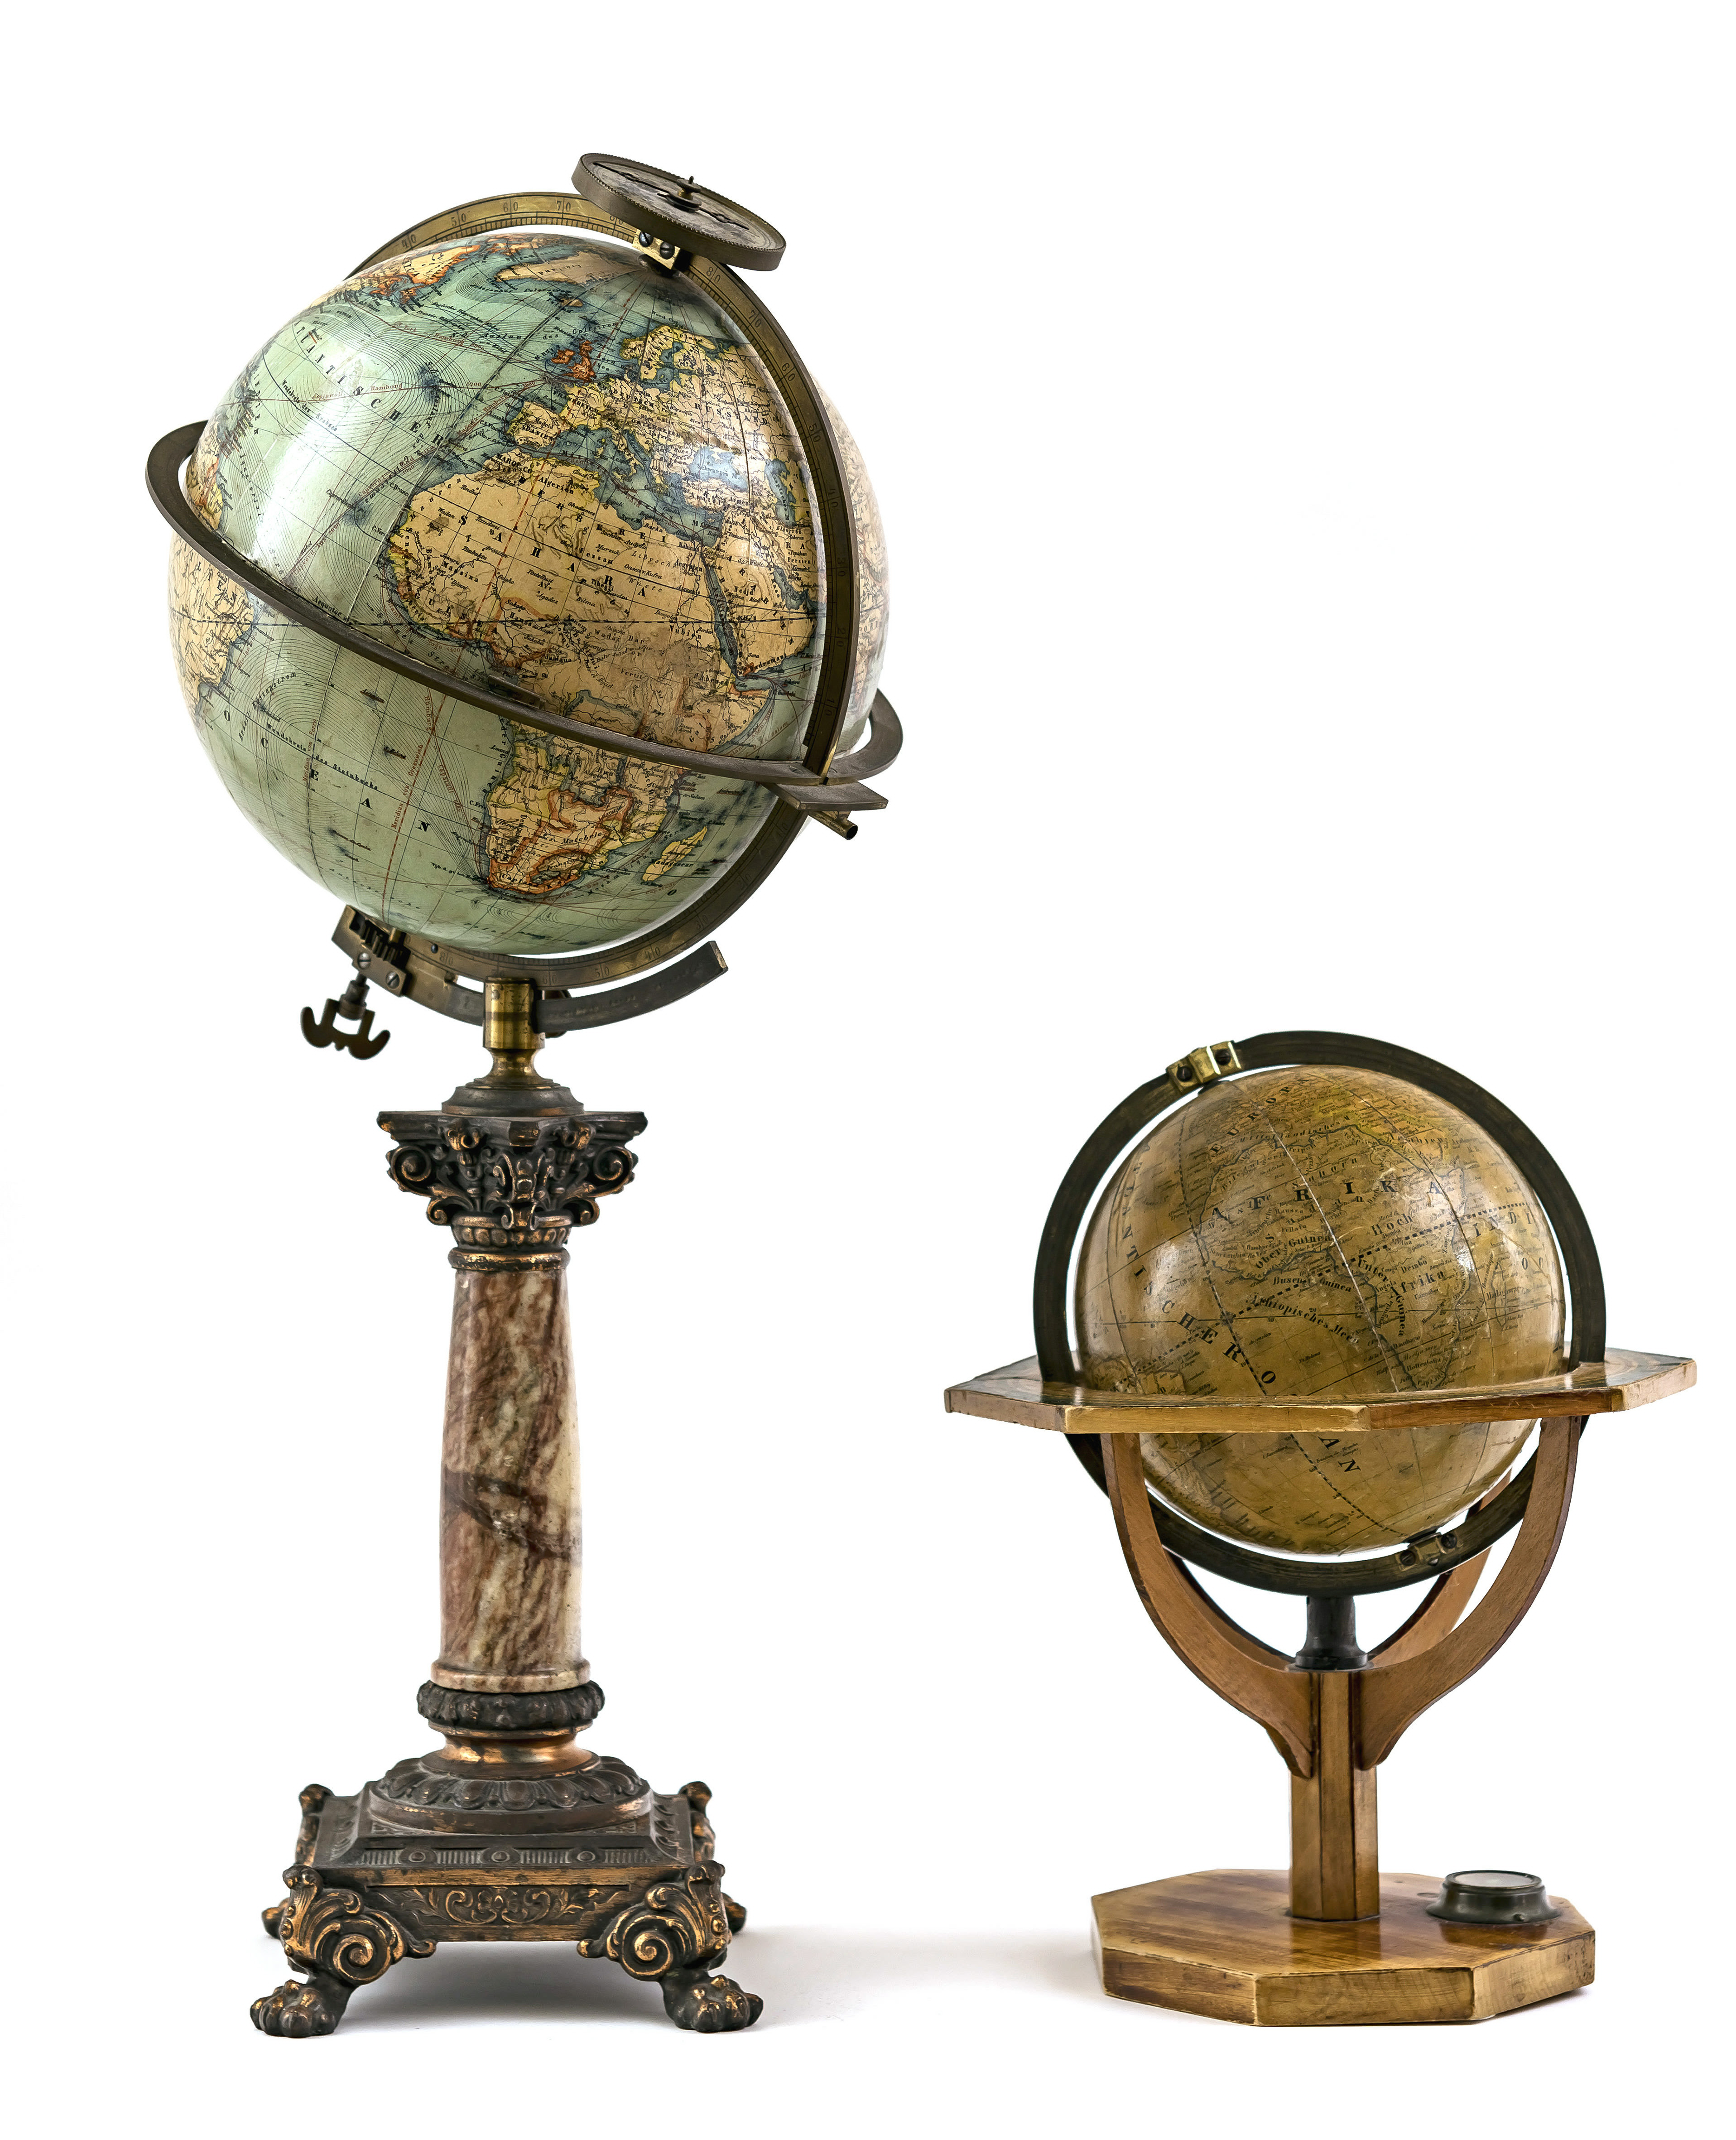 Two terrestrial globes - Berlin / Nuremberg, 19th / 20th century, publishing house of D. Reimer / pu